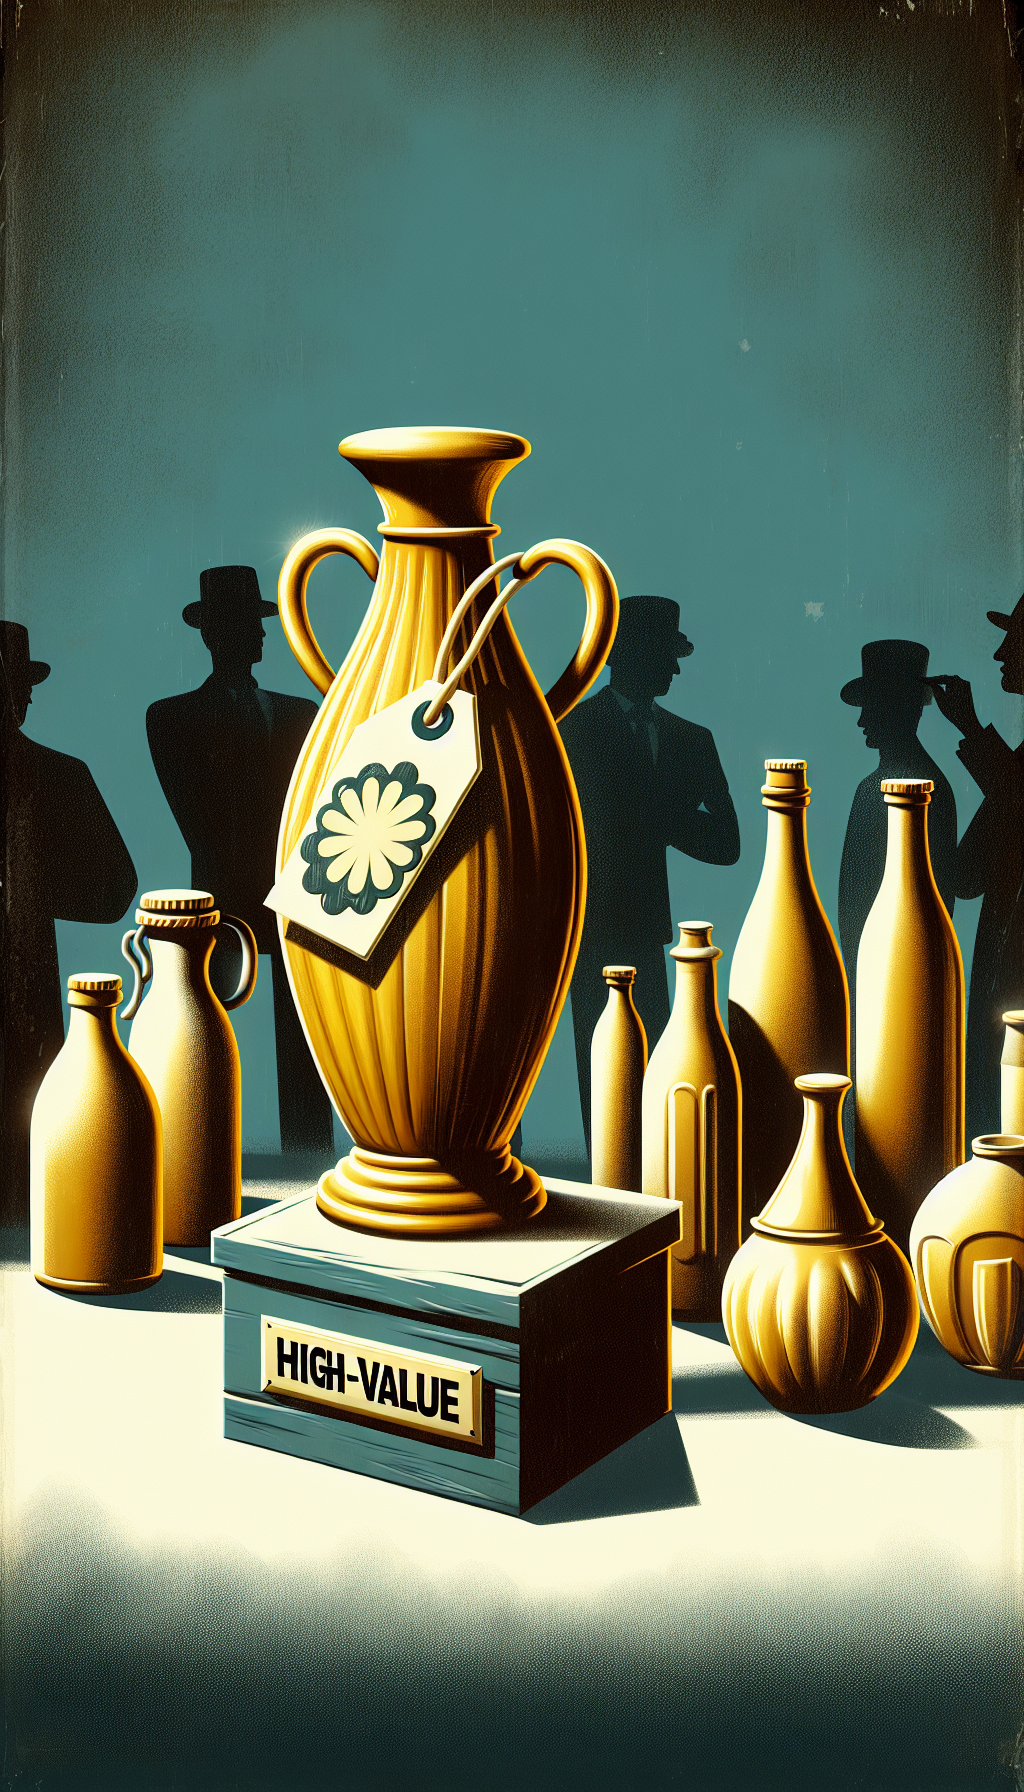 An illustration depicting a vintage, golden-hued trophy-style milk bottle, labeled "High-Value", stands atop a pedestal surrounded by various classic milk bottles of different shapes and sizes. Shadowed figures of collectors with magnifying glasses scrutinize the bottles, hinting at their search for precious antiquities, while a price tag shaped like a cream swirl hangs off the trophy bottle's neck.